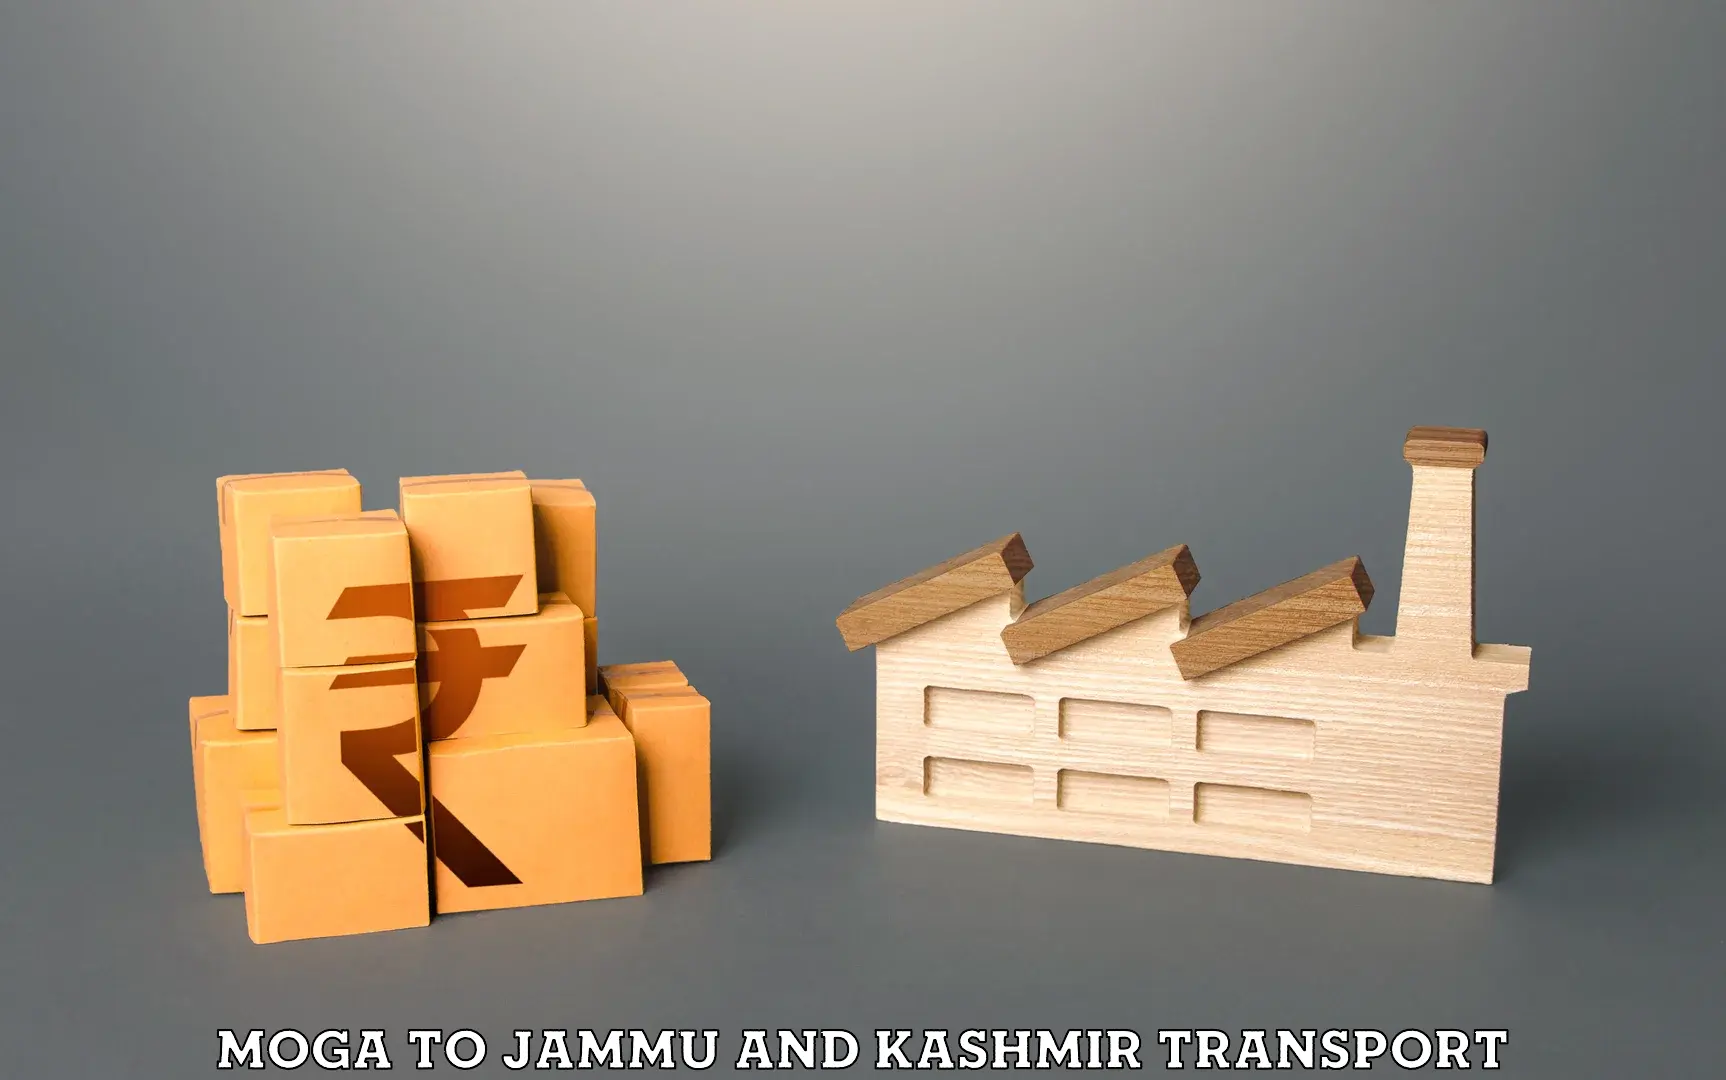 Transport bike from one state to another Moga to Jammu and Kashmir